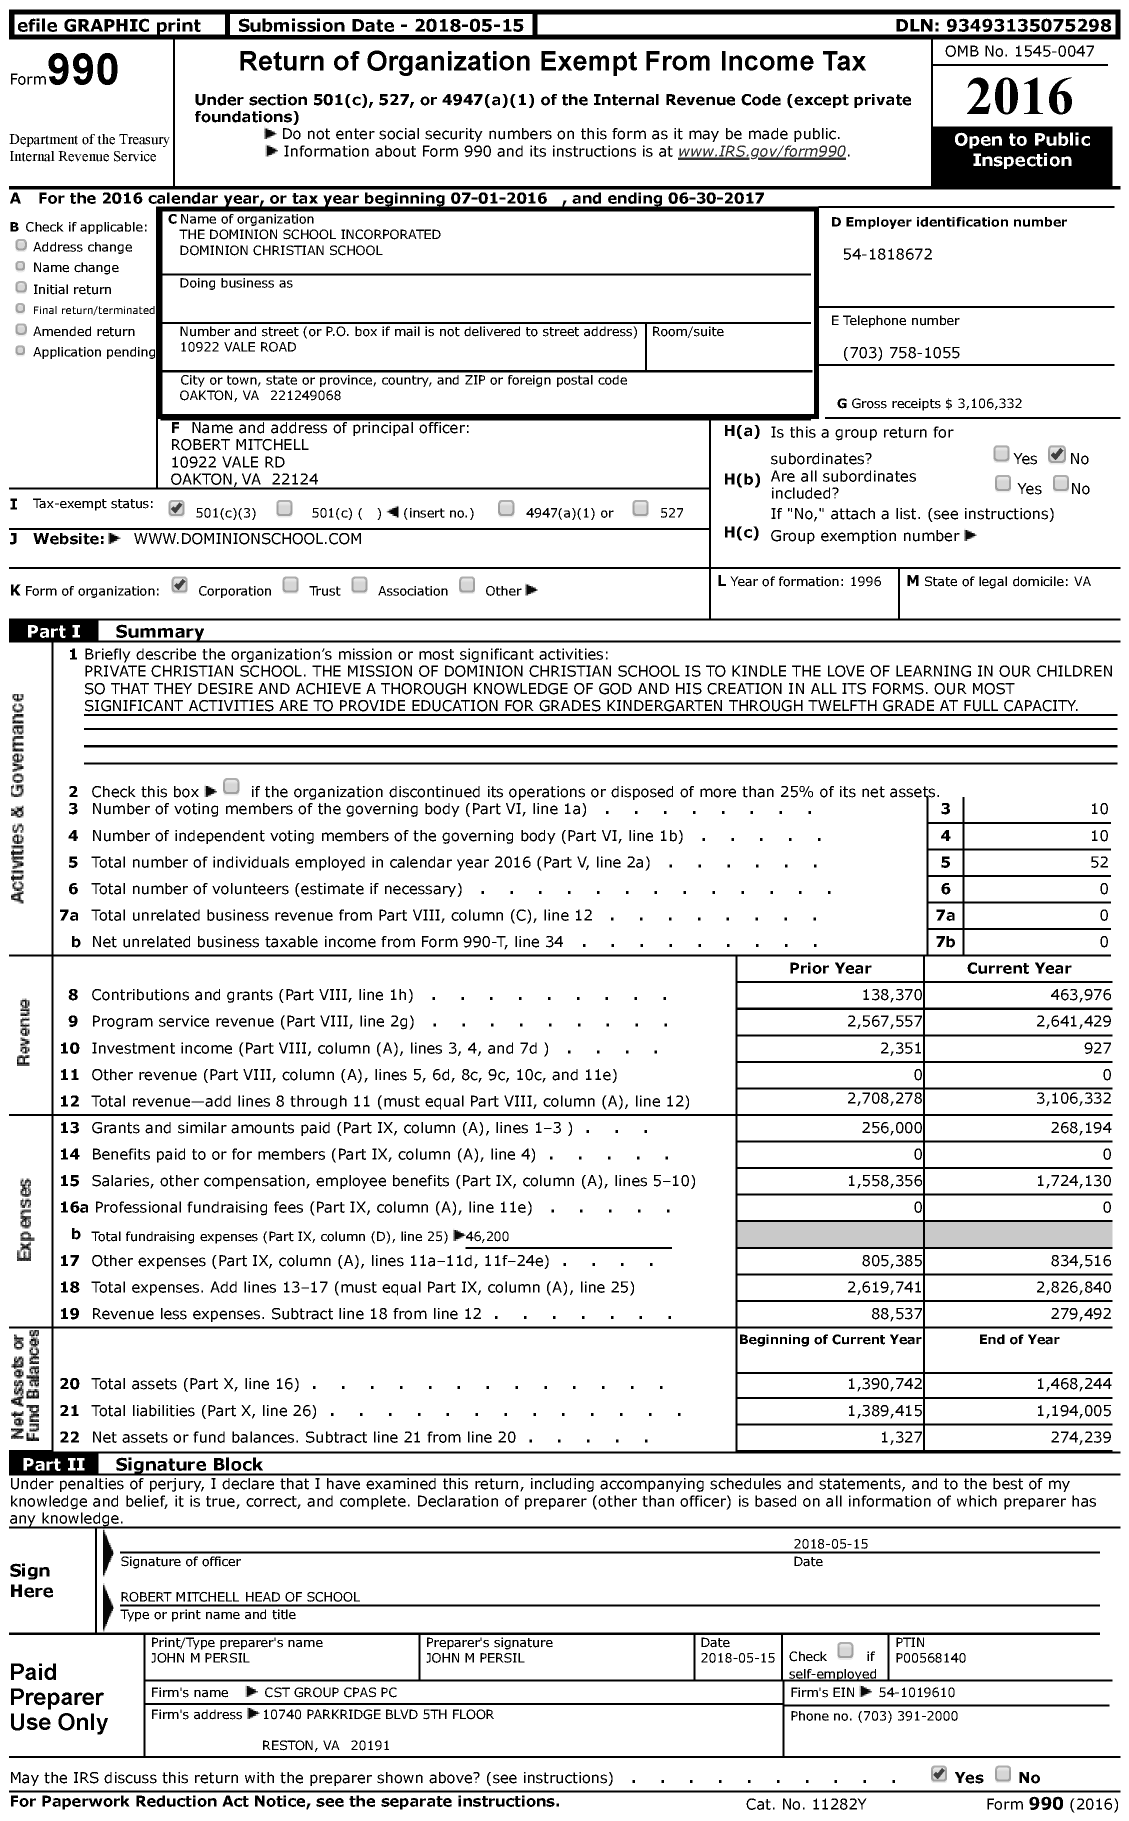 Image of first page of 2016 Form 990 for The Dominion School Incorporated Dominion Christian School